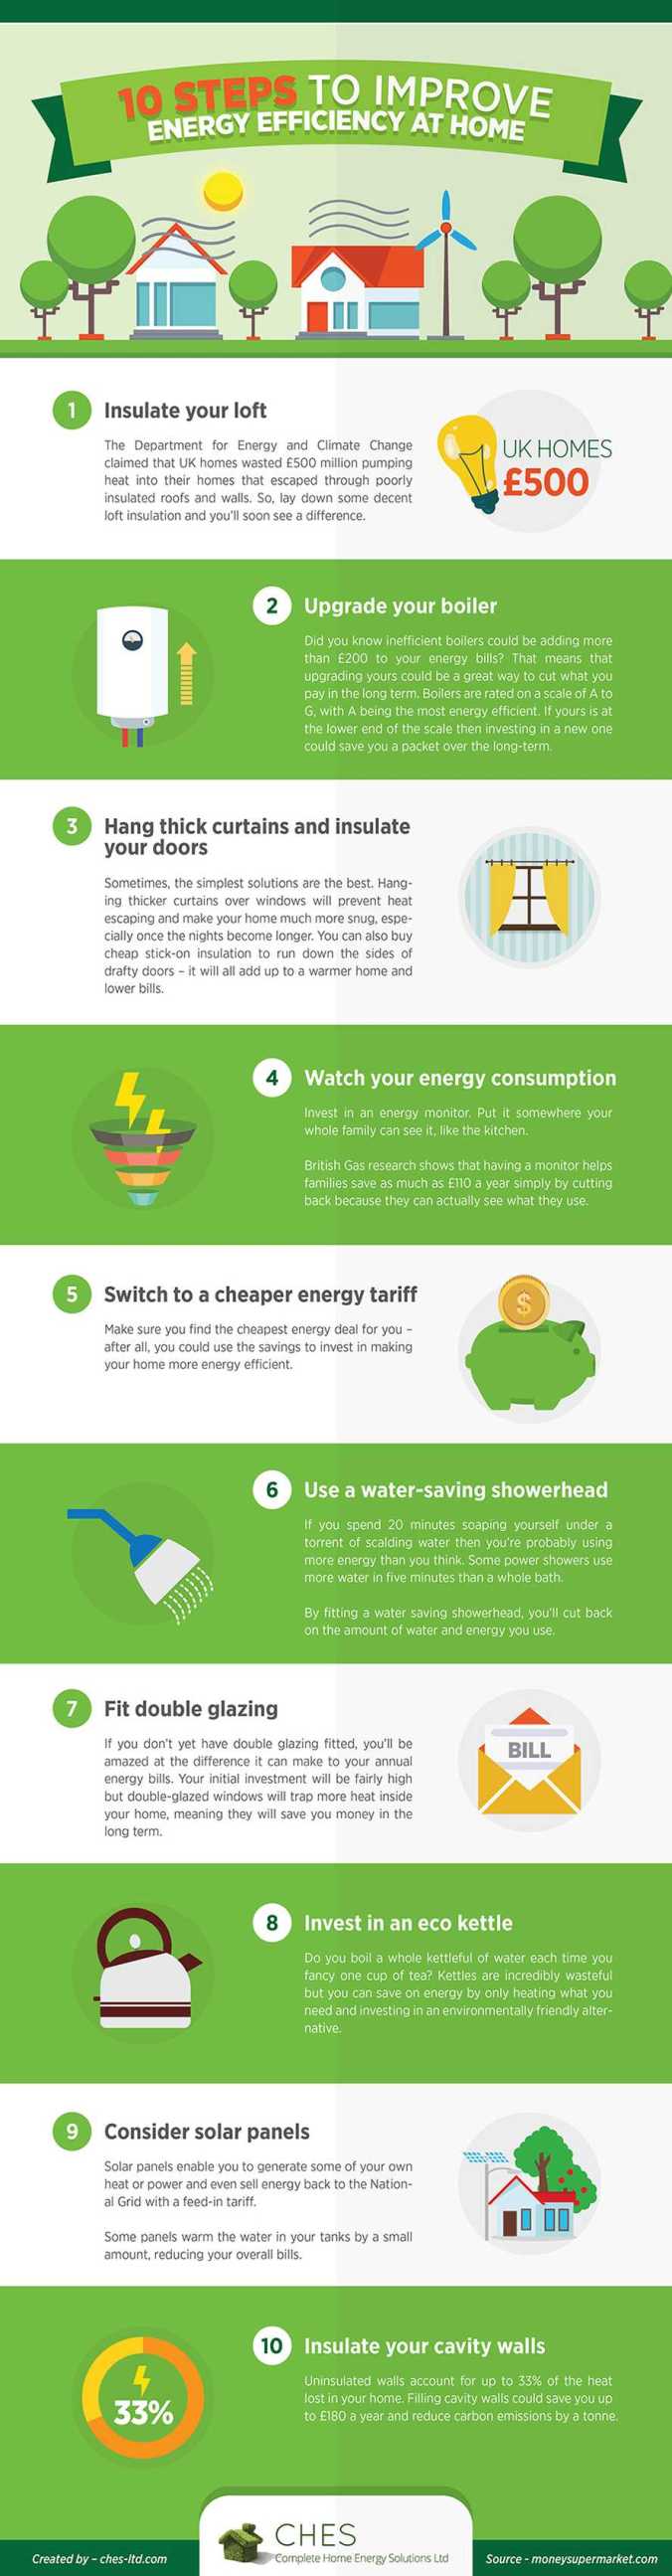 10-steps-to-improve-energy-efficiency-at-home